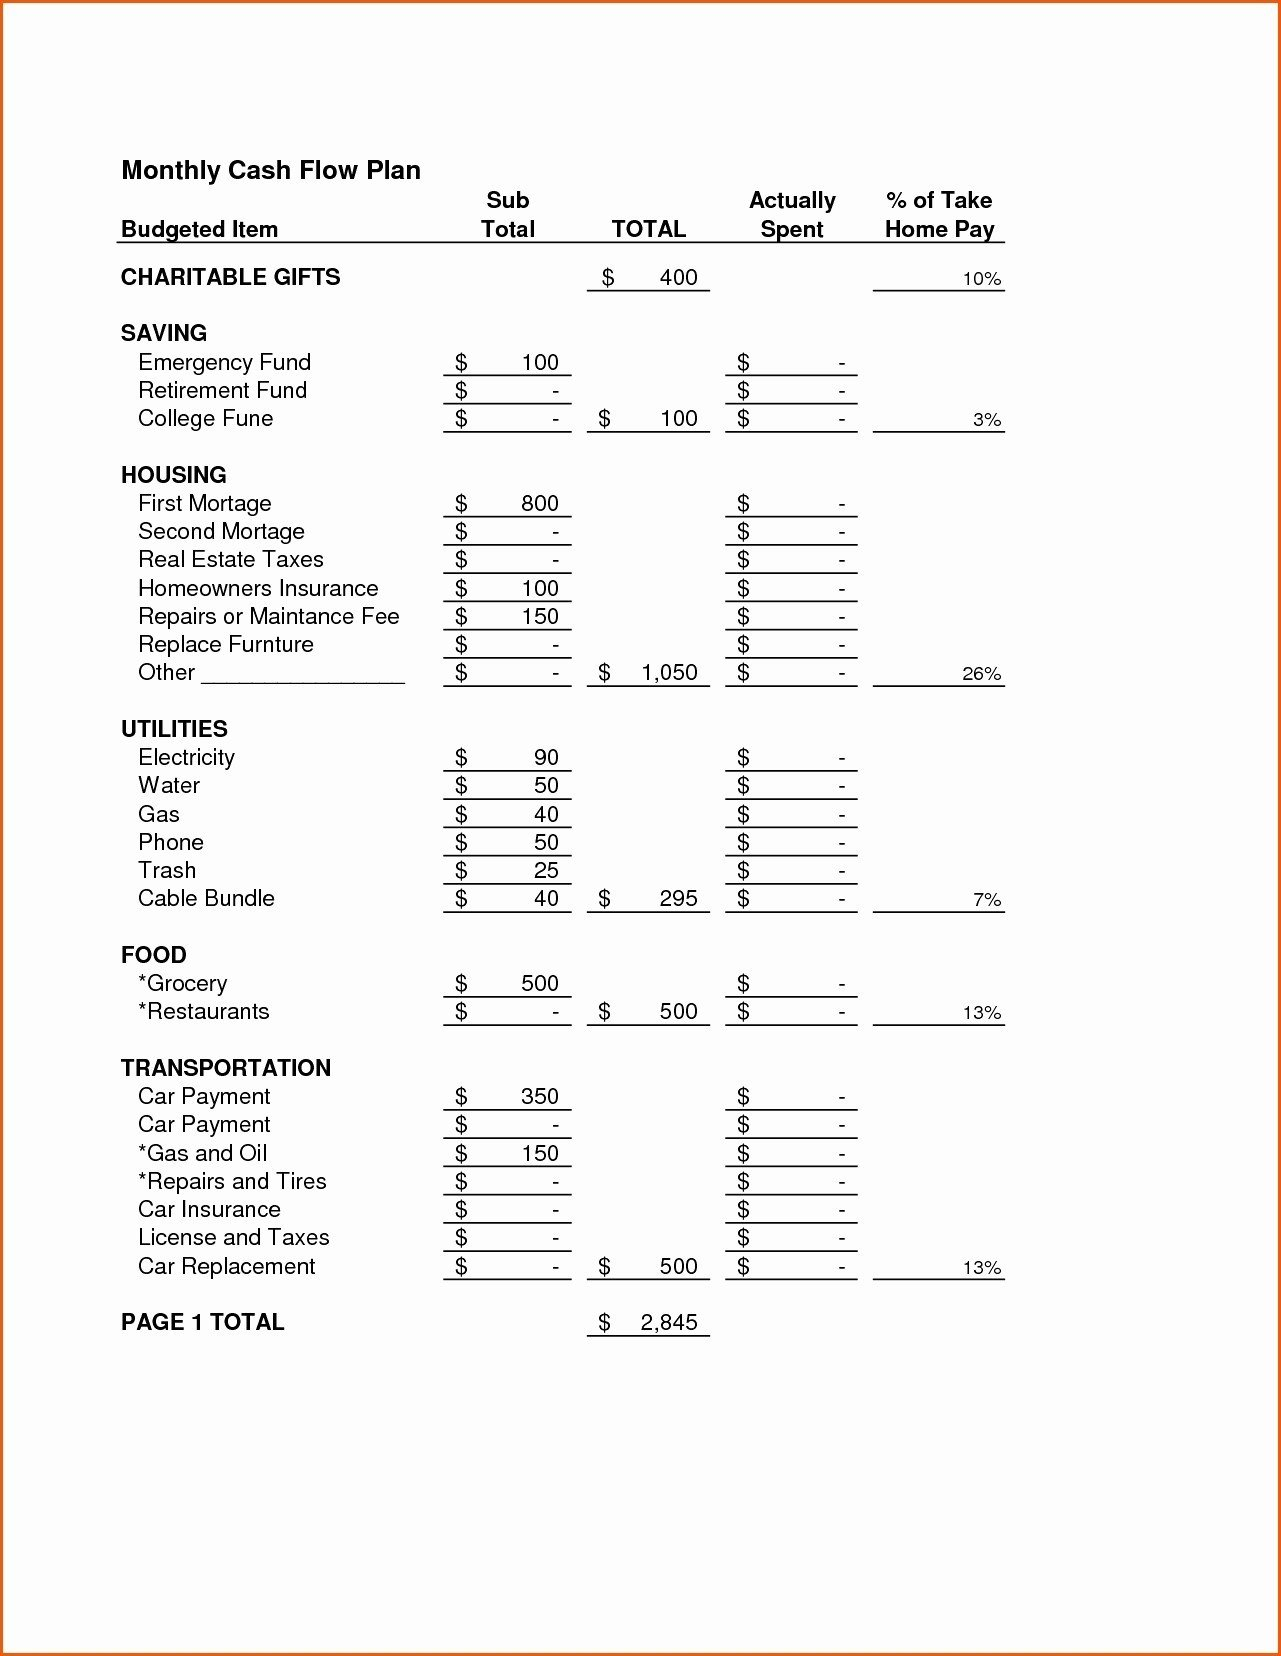 Dave Ramsey Monthly Cash Flow Plan Worksheets Archives  Bibrucker With Dave Ramsey Worksheets